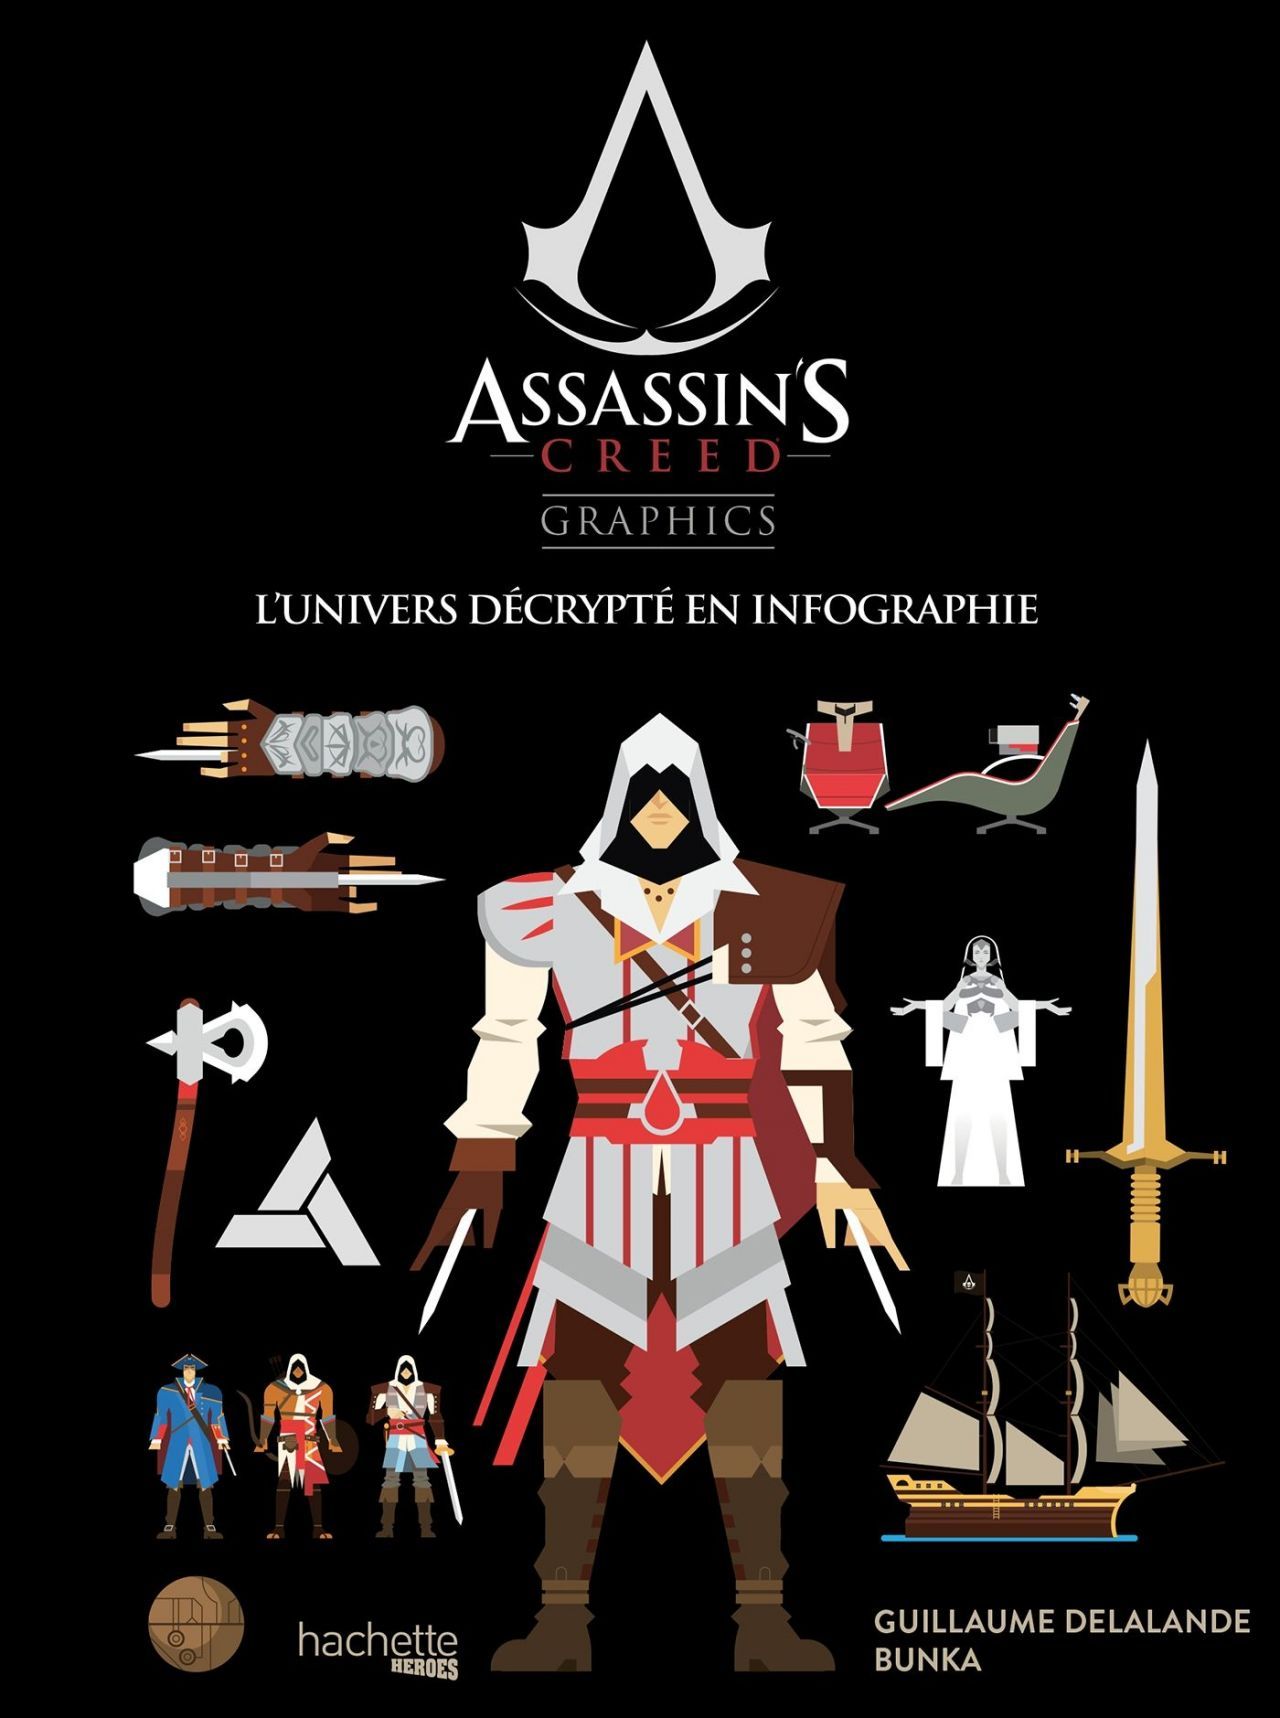 Assassin's Creed Graphics : tout l'univers Assassin's Creed en infographies